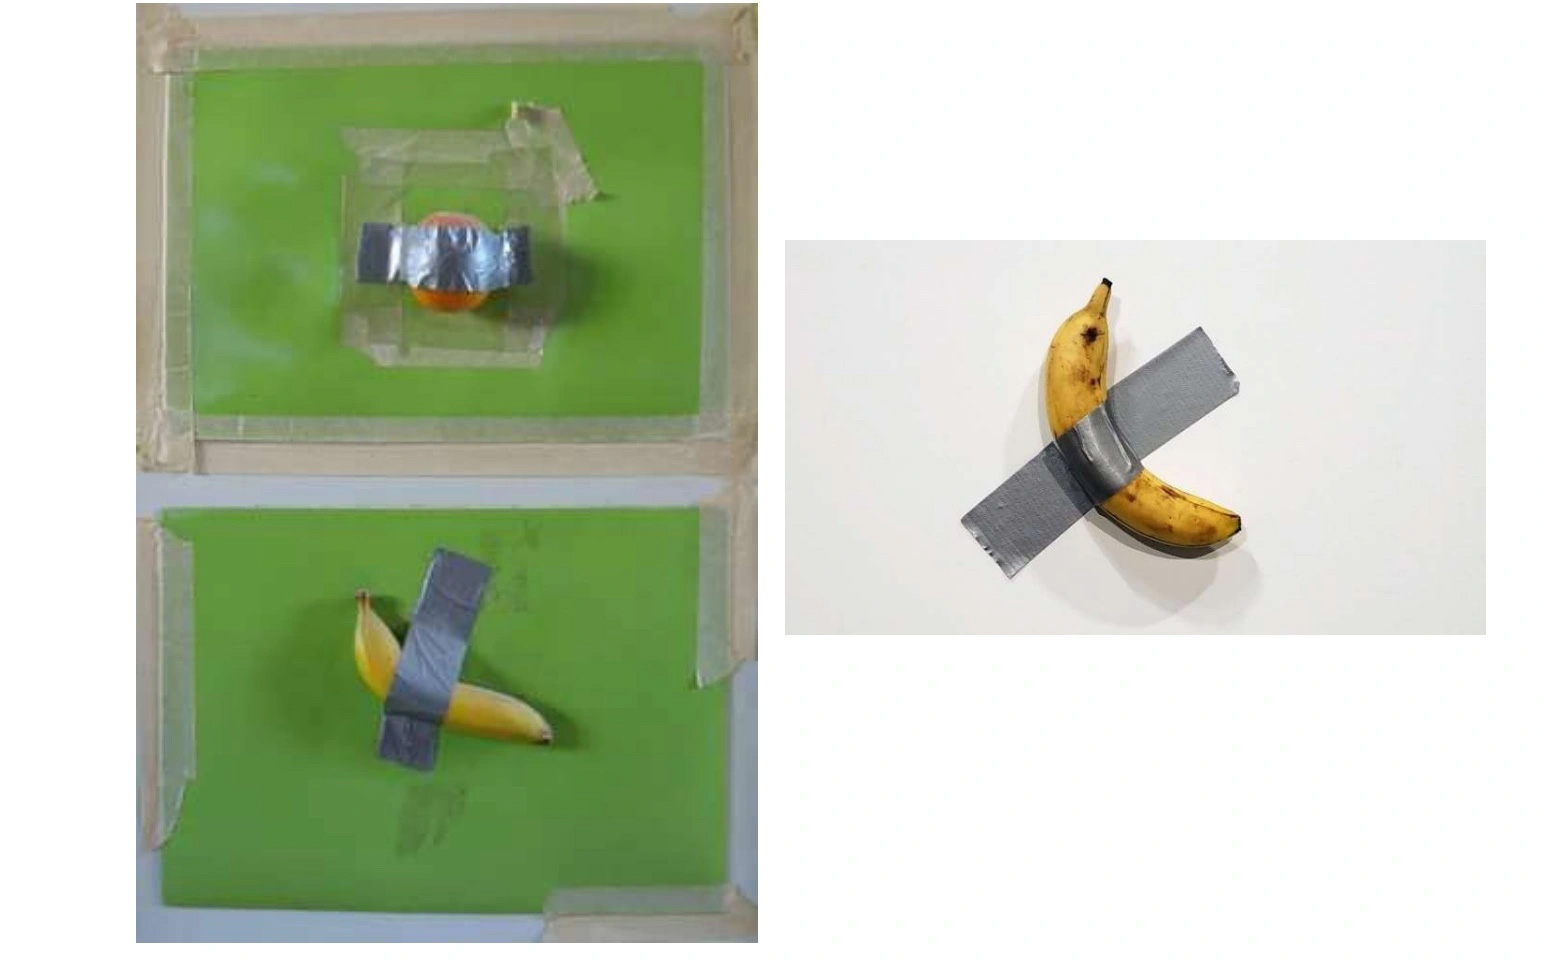 Maurizio Cattelan Responds to Copyright Infringement Lawsuit, Saying He Created Viral Banana Sculpture "Without Knowledge" of Other Artist`s Work